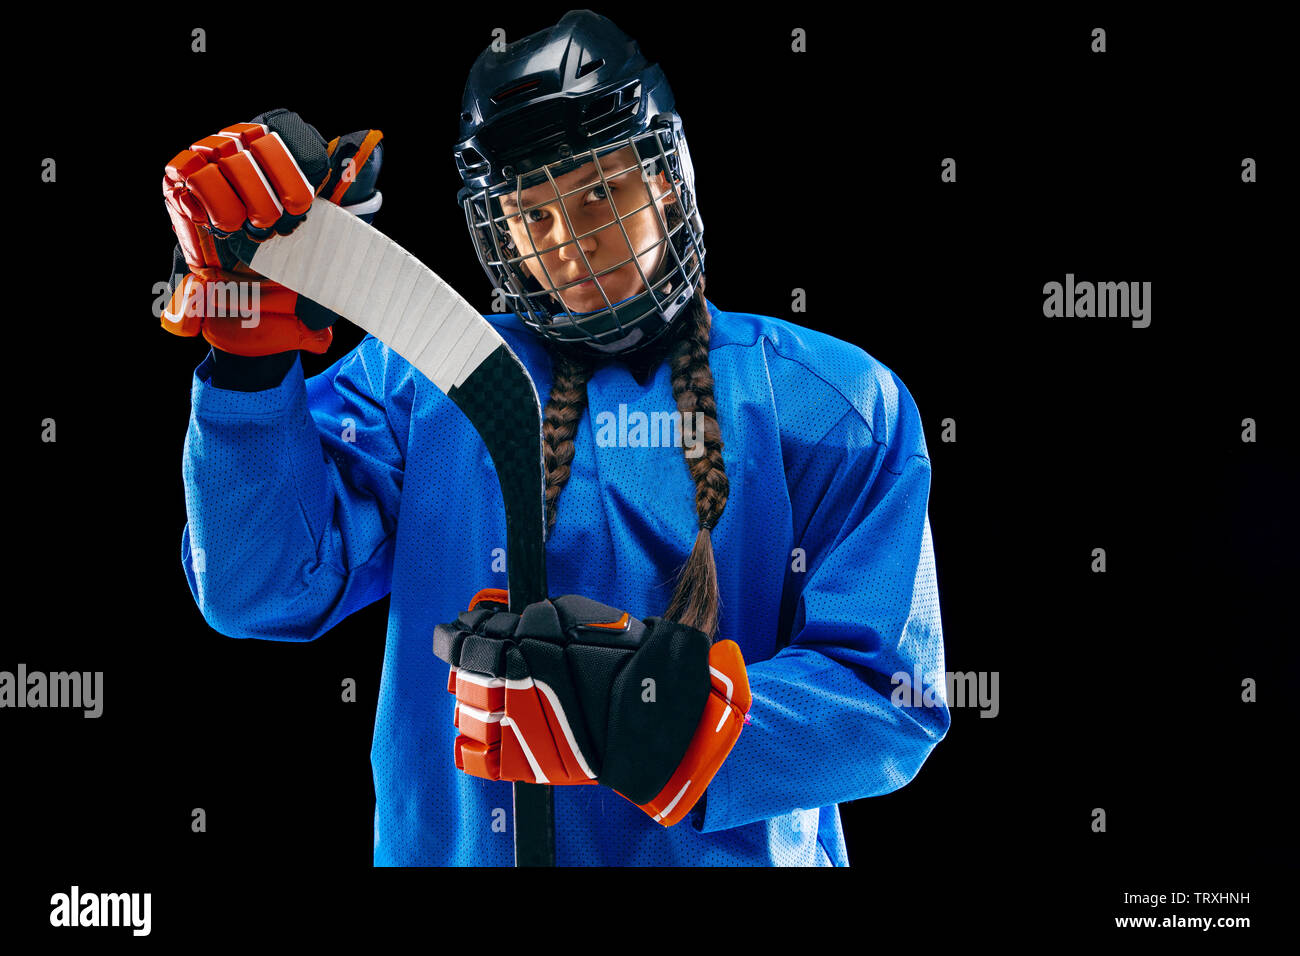 Male player holding ice hockey stick while standing at rink Stock Photo -  Alamy